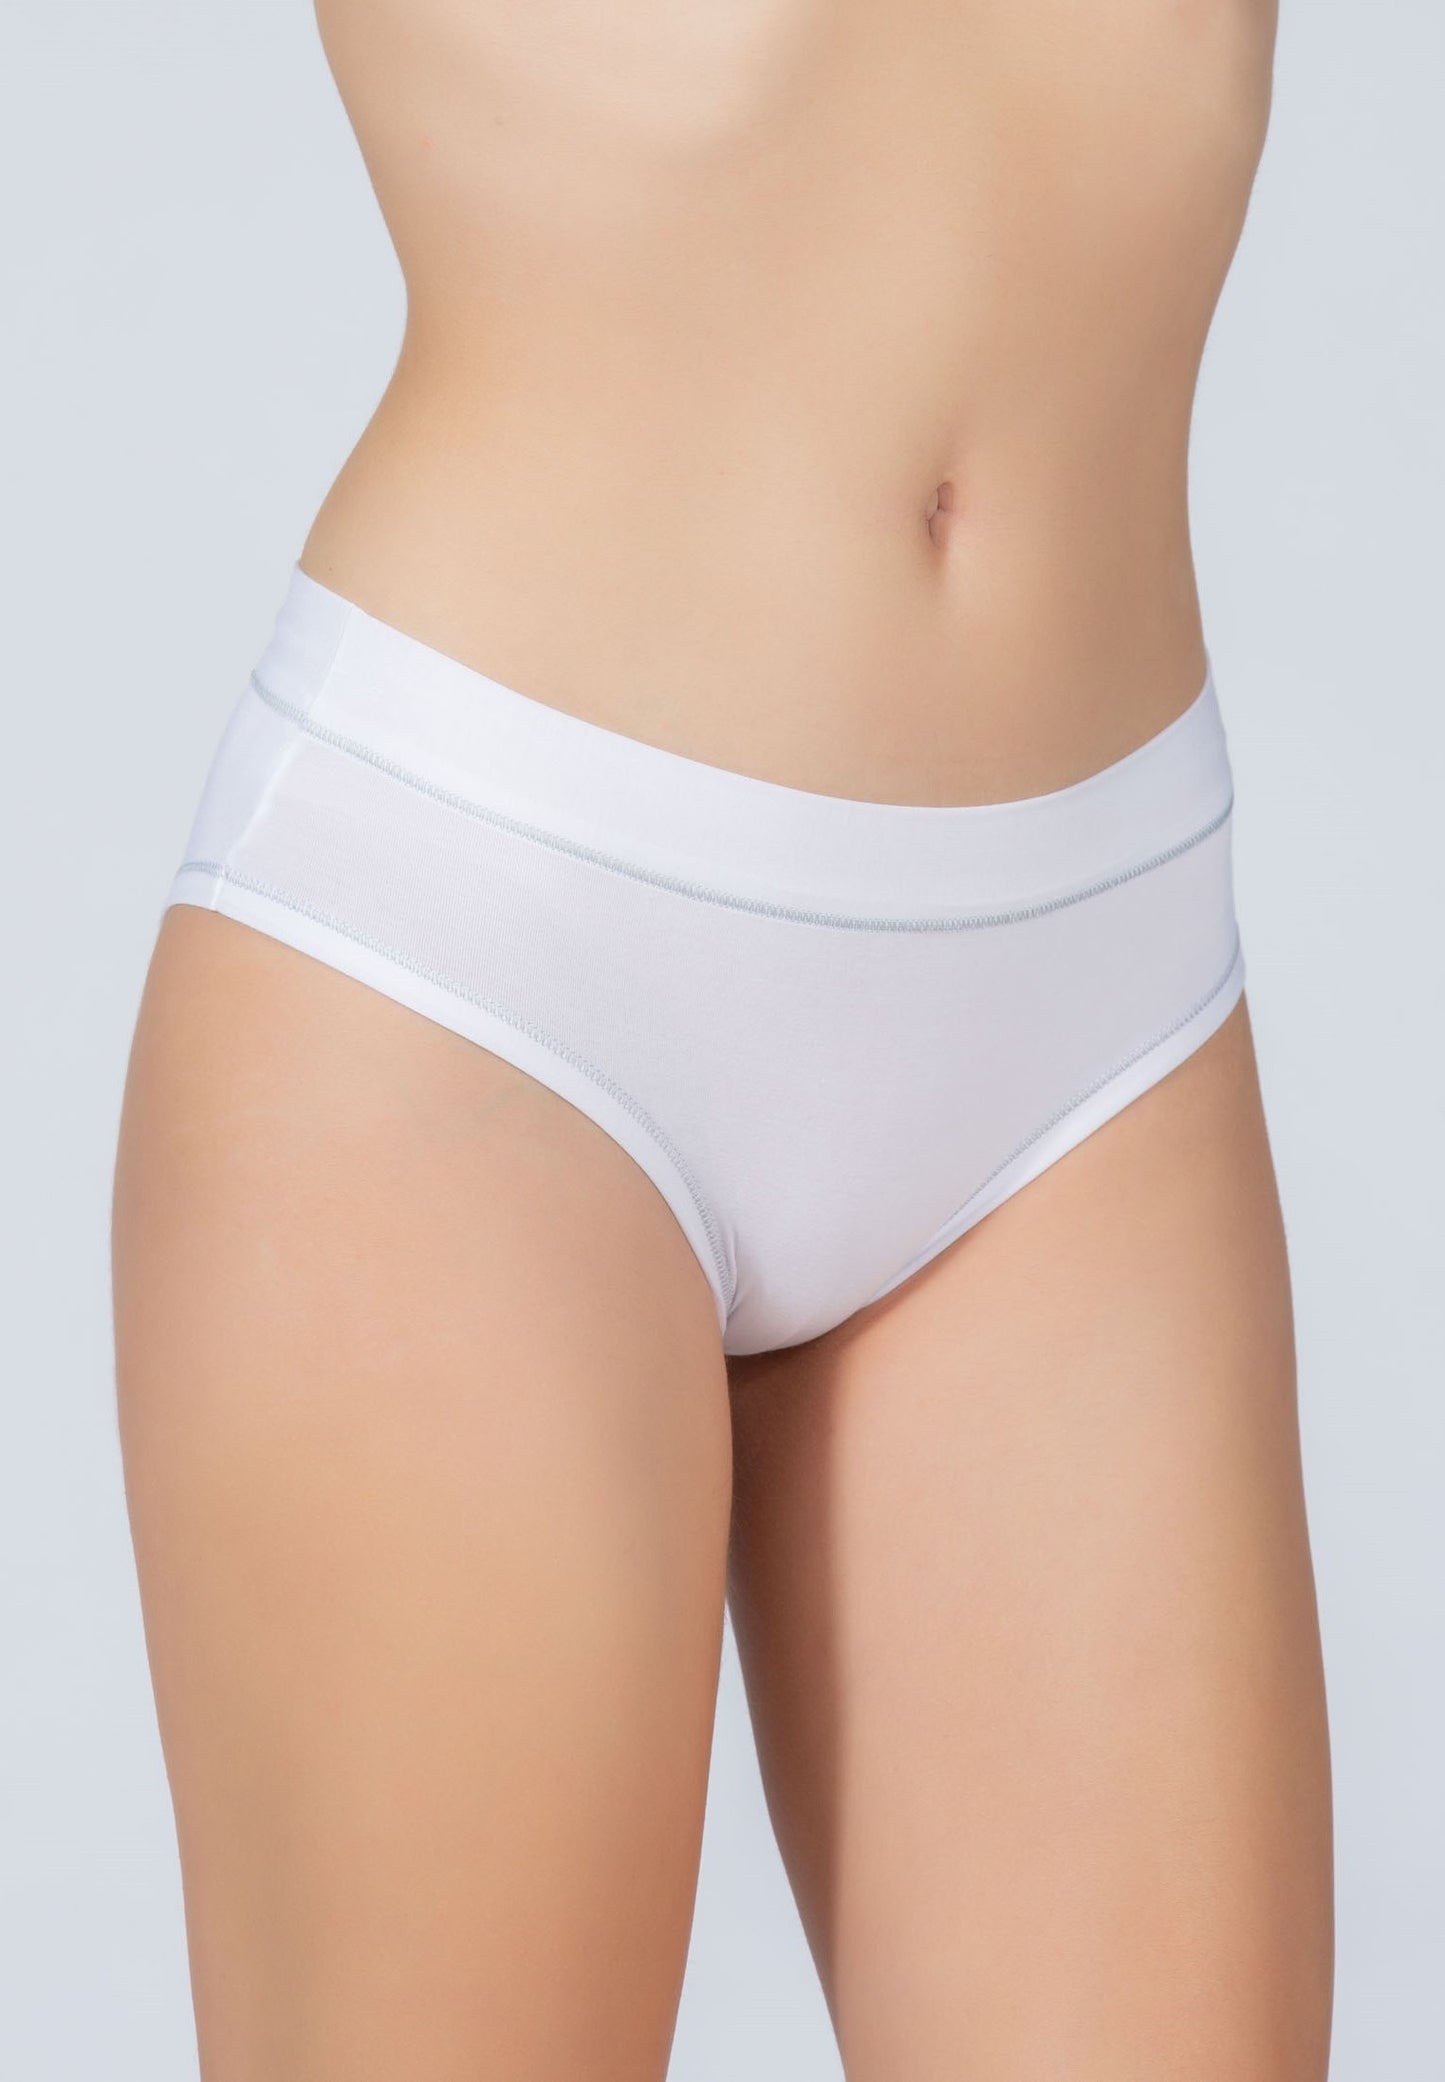 This EGi brief features a thin and breathable modal fabric, providing superior comfort.